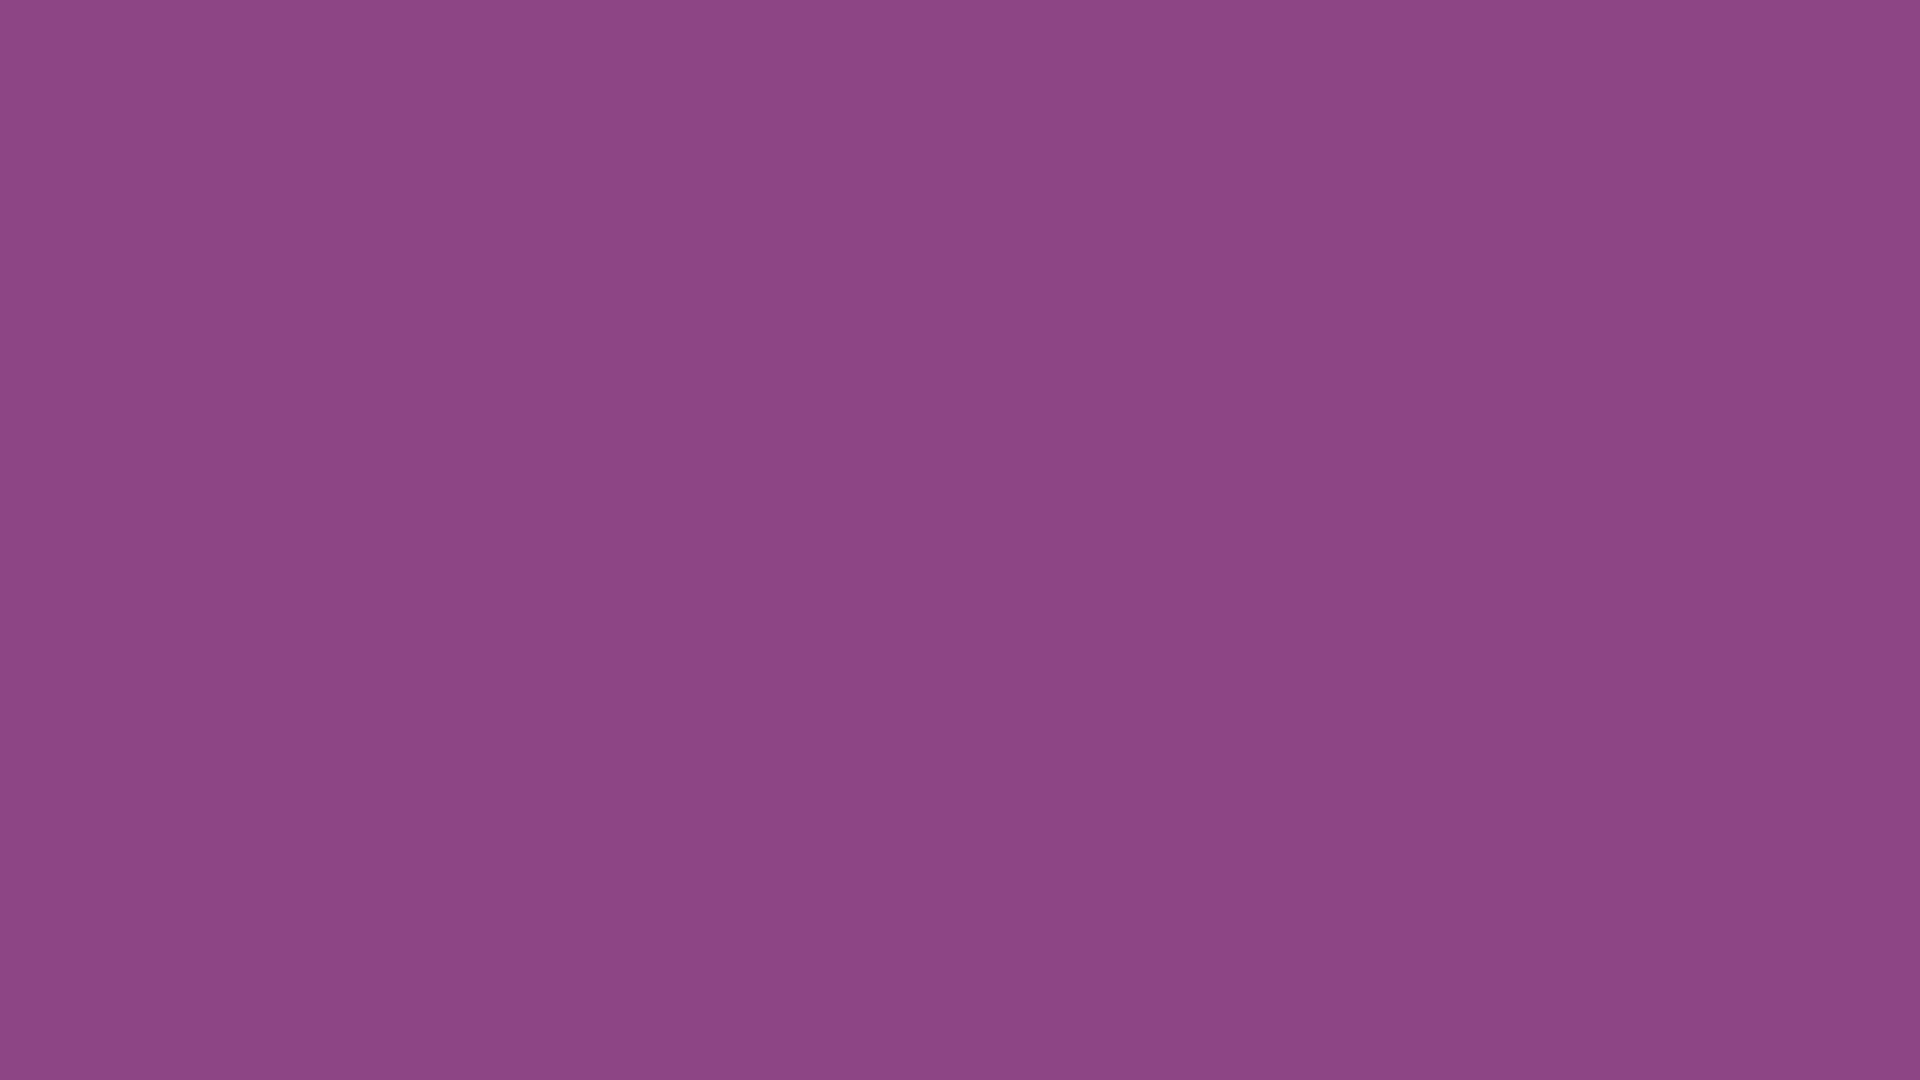 … Solid Color Wallpaper Border with Plum Color